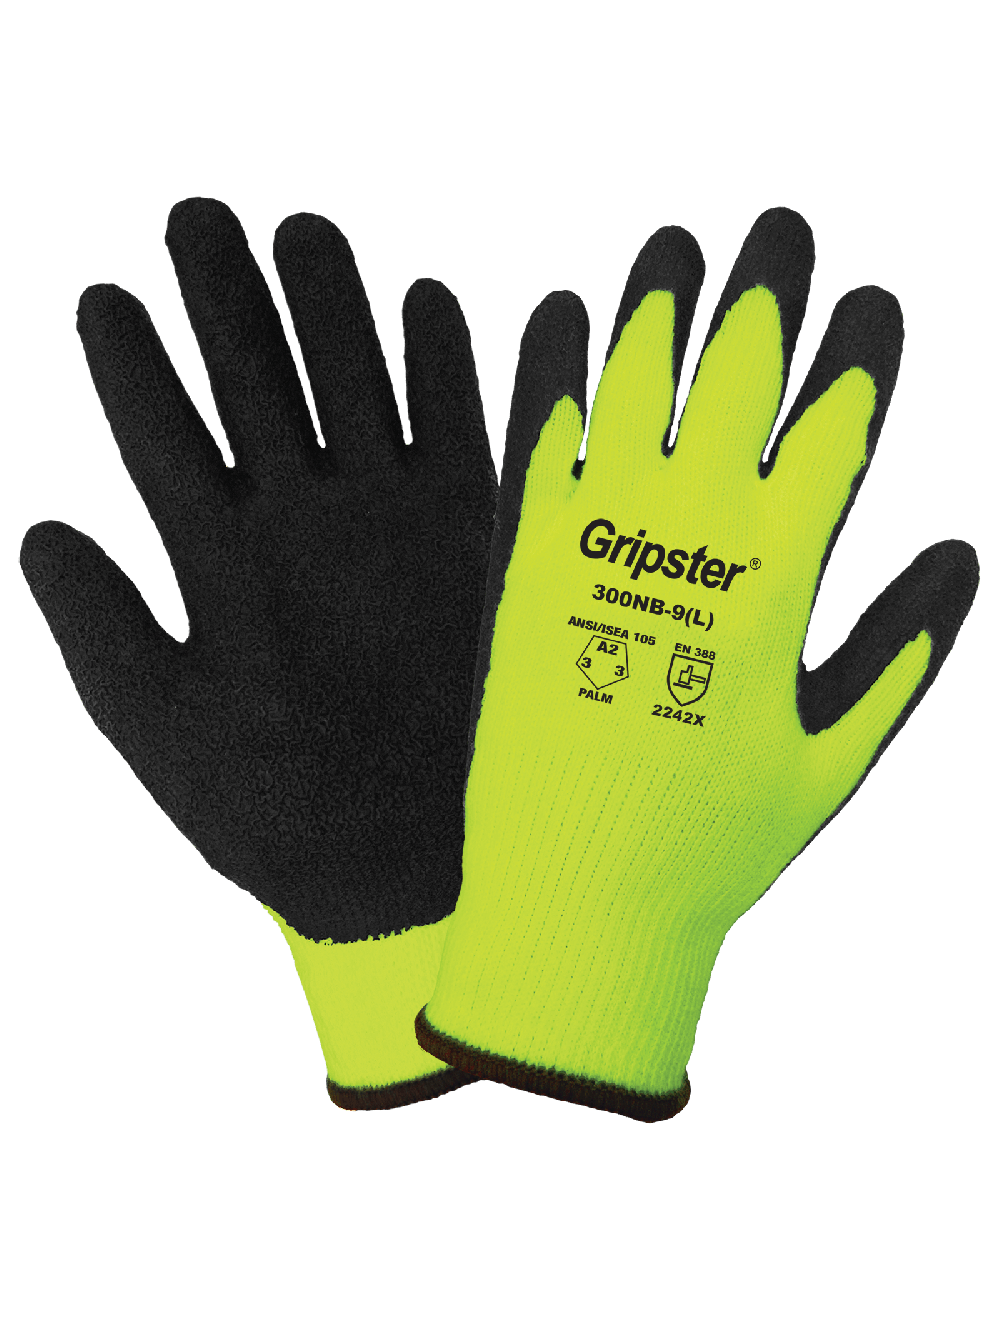 Global Glove Gripster